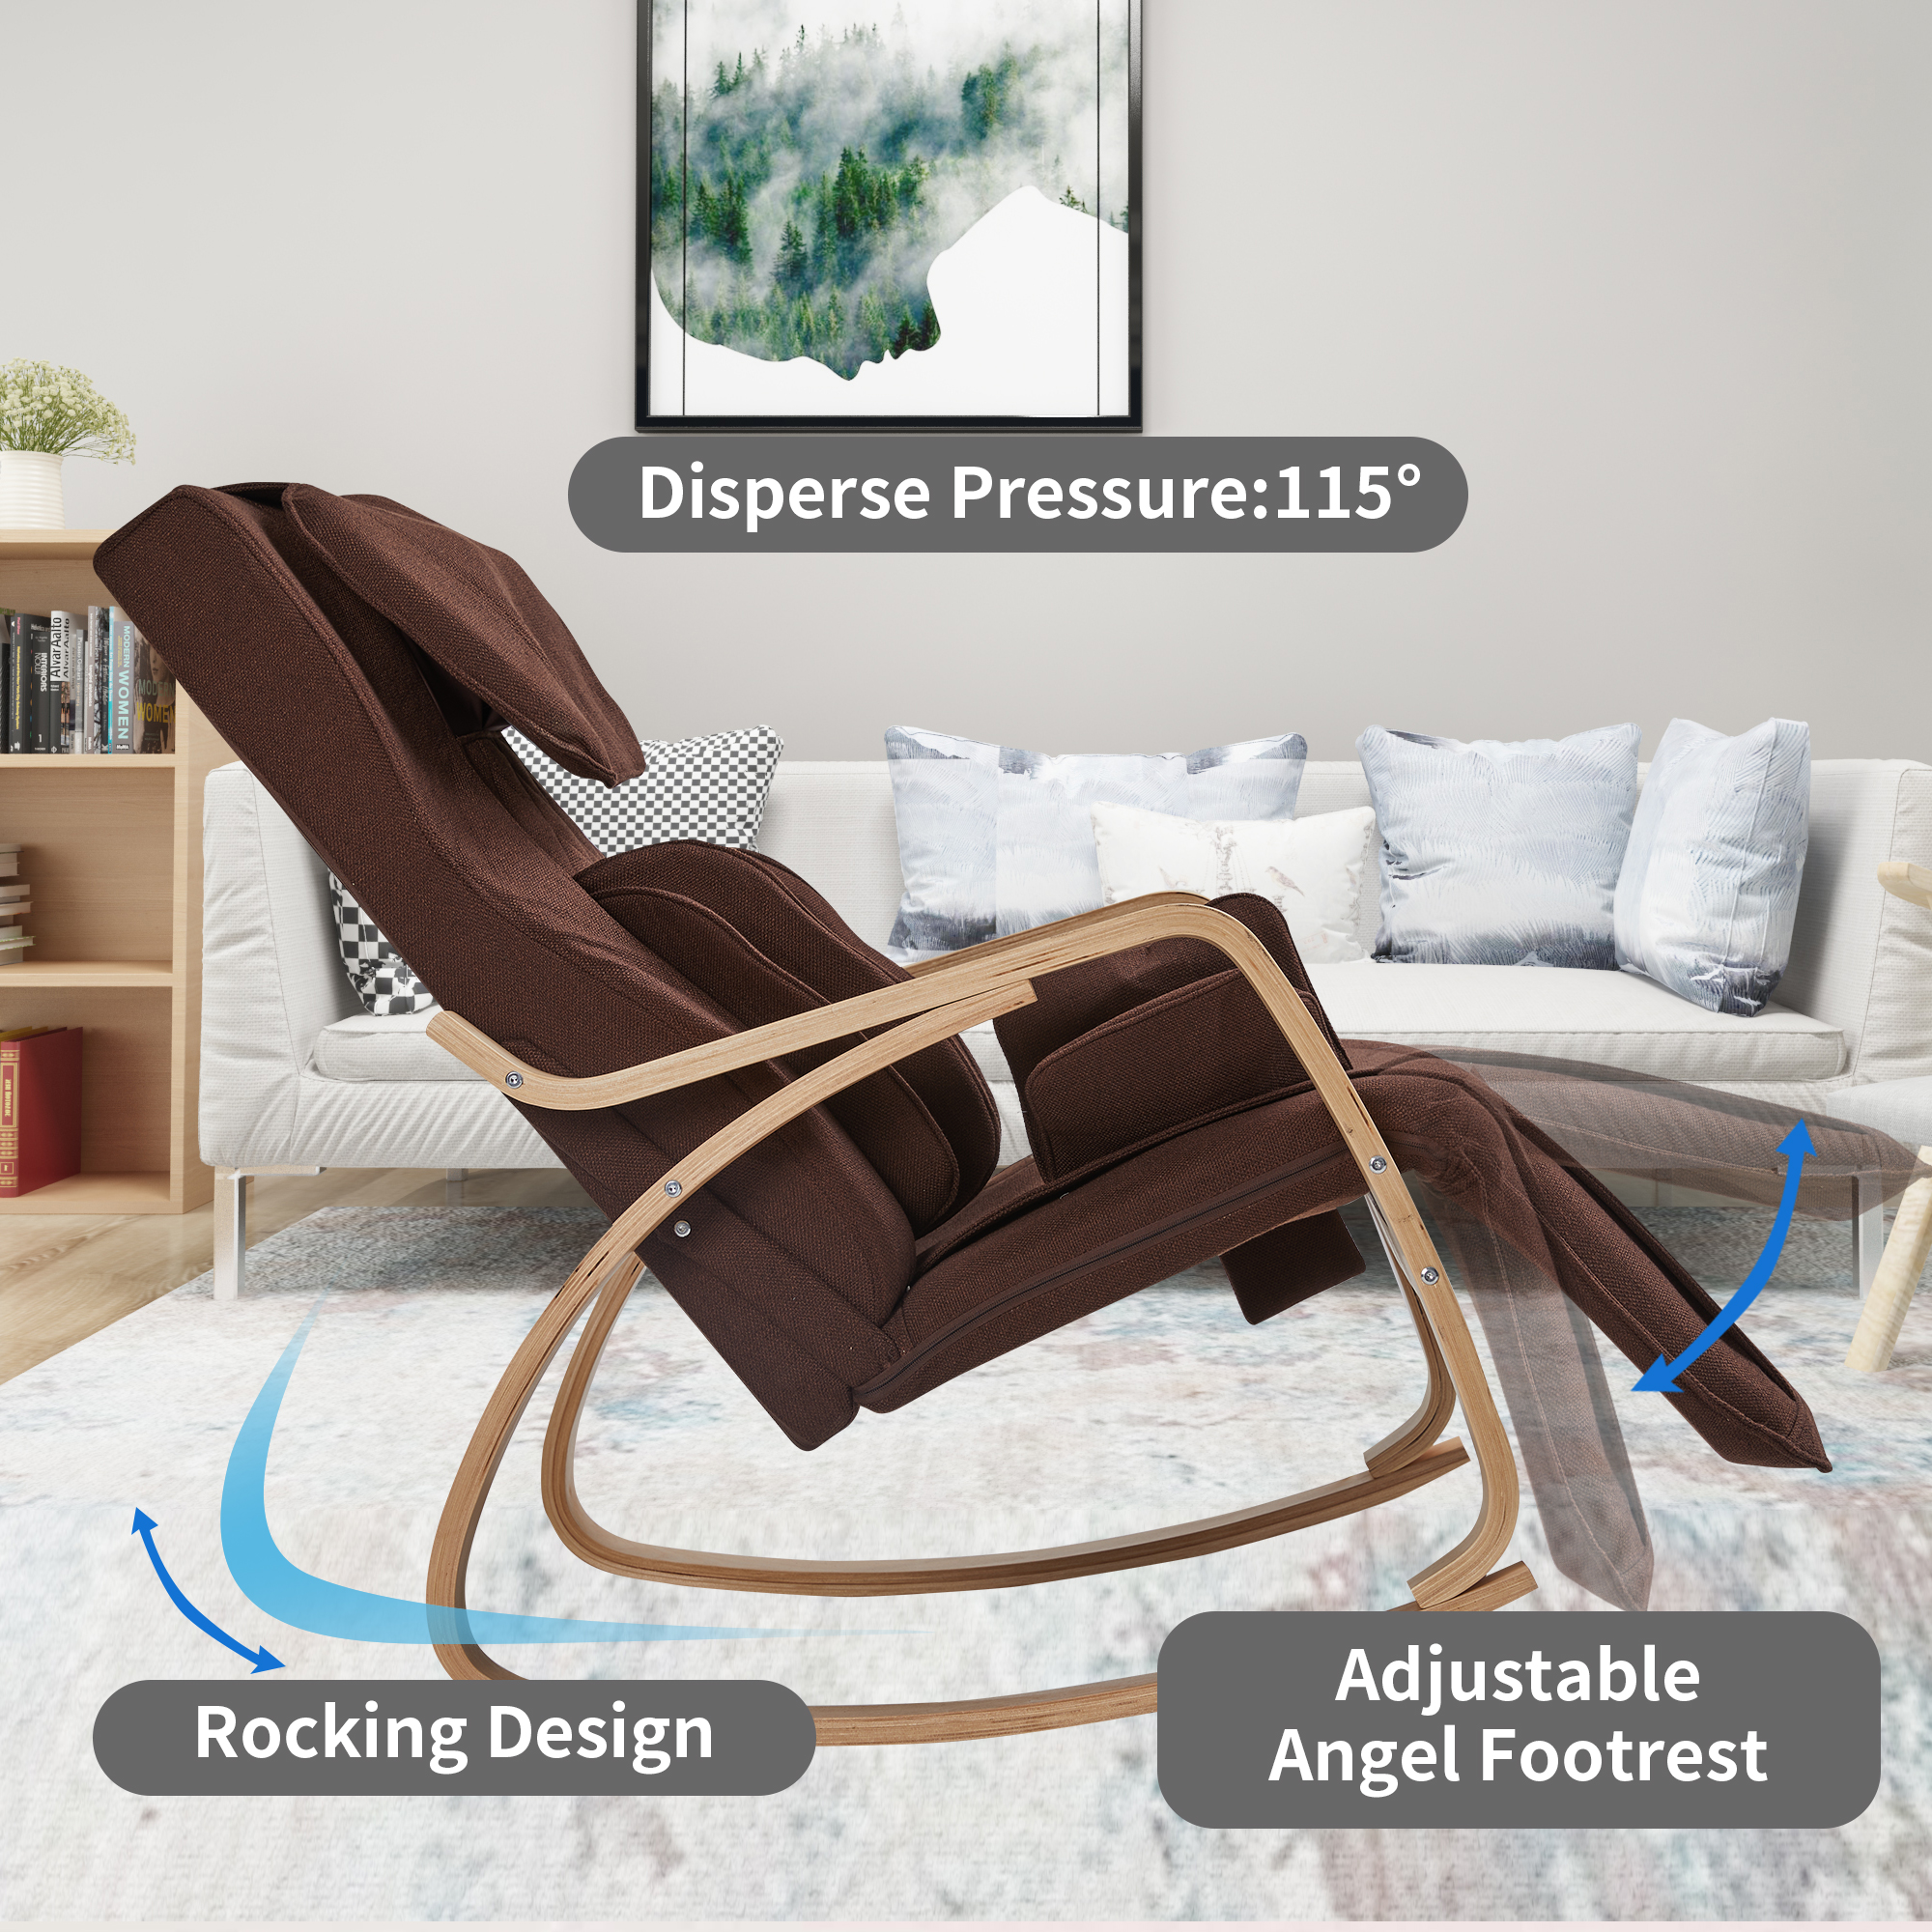 Full massage function-Air pressure-Comfortable Relax Rocking Chair, Lounge Chair Relax Chair with Cotton Fabric Cushion  Brown-Boyel Living